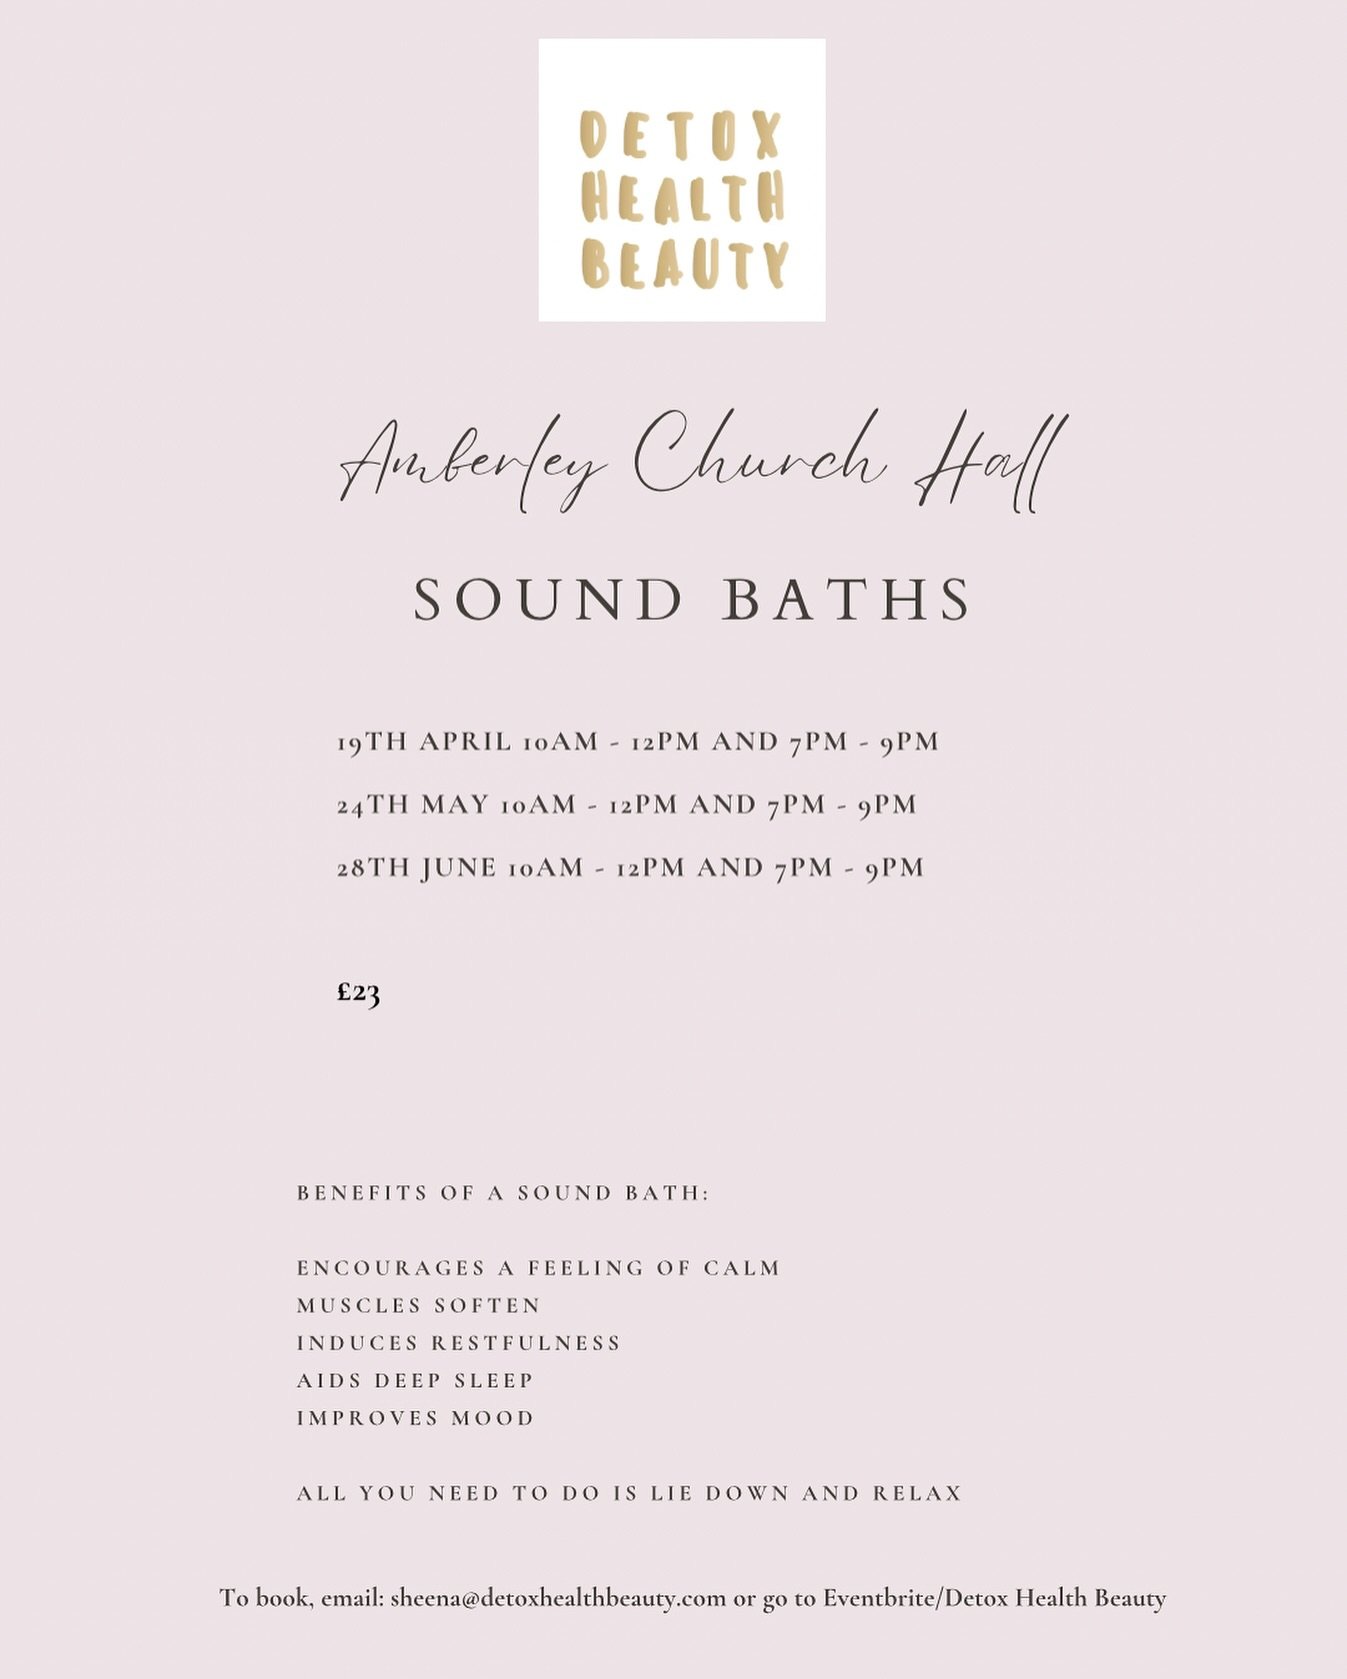 Just to let you know about our sound baths in April, May and June (Amberley). Having a monthly sound bath truly is nectar for the mind, body and soul. This is a deeply relaxing and nourishing experience, which I find fills me and sets me up for weeks